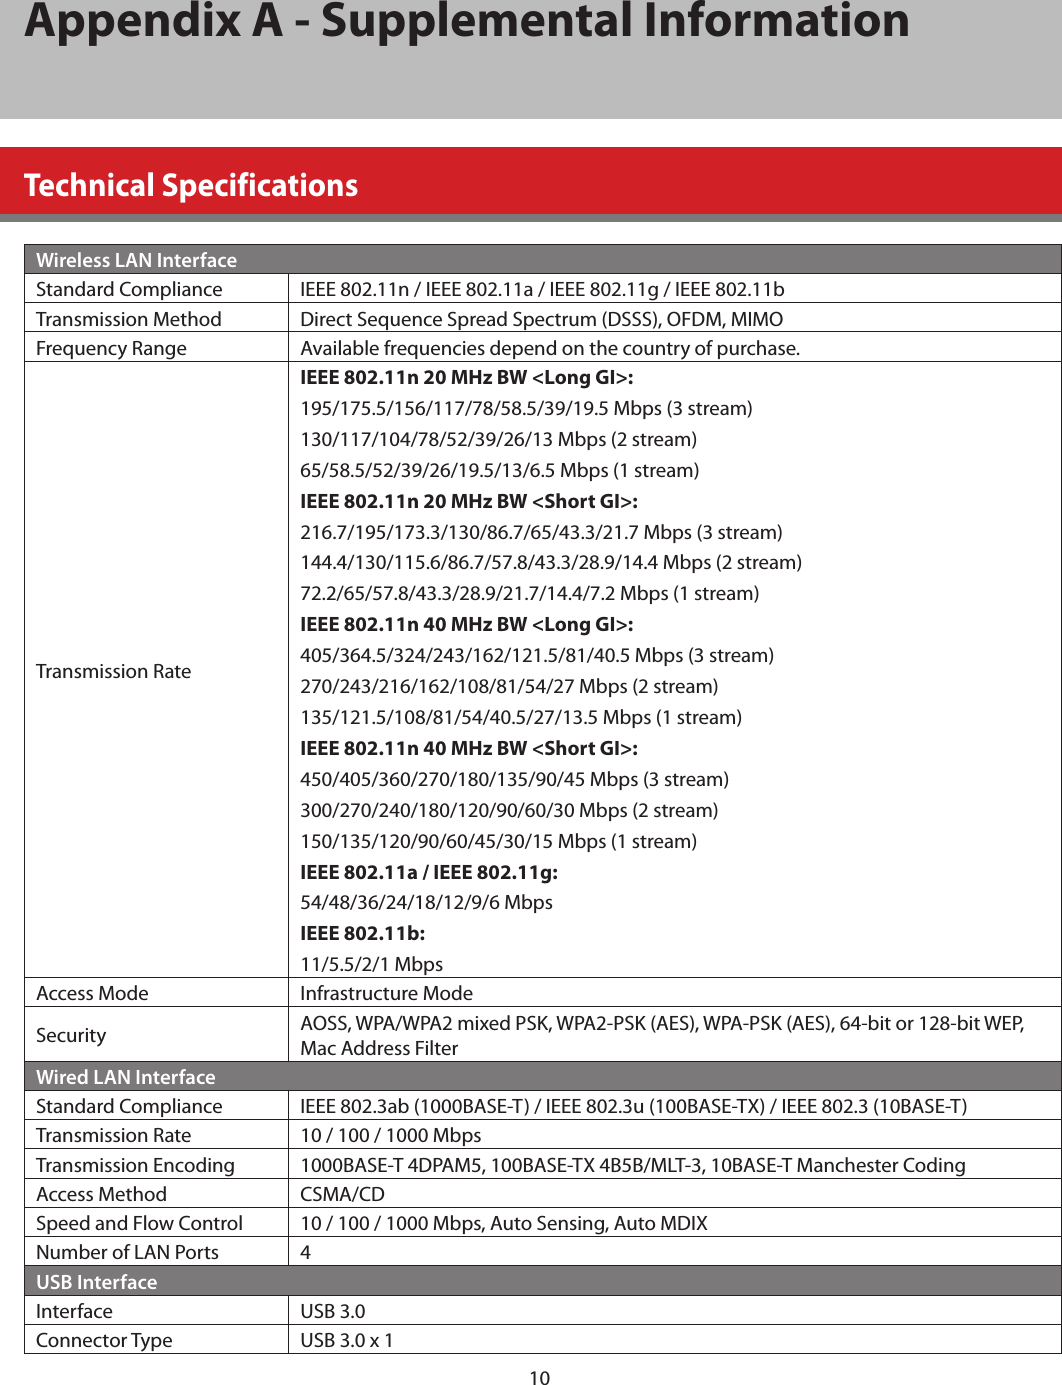 10Appendix A - Supplemental InformationTechnical SpecificationsWireless LAN InterfaceStandard Compliance IEEE 802.11n / IEEE 802.11a / IEEE 802.11g / IEEE 802.11bTransmission Method Direct Sequence Spread Spectrum (DSSS), OFDM, MIMOFrequency Range Available frequencies depend on the country of purchase.Transmission RateIEEE 802.11n 20 MHz BW &lt;Long GI&gt;:195/175.5/156/117/78/58.5/39/19.5 Mbps (3 stream)130/117/104/78/52/39/26/13 Mbps (2 stream)65/58.5/52/39/26/19.5/13/6.5 Mbps (1 stream)IEEE 802.11n 20 MHz BW &lt;Short GI&gt;:216.7/195/173.3/130/86.7/65/43.3/21.7 Mbps (3 stream)144.4/130/115.6/86.7/57.8/43.3/28.9/14.4 Mbps (2 stream)72.2/65/57.8/43.3/28.9/21.7/14.4/7.2 Mbps (1 stream)IEEE 802.11n 40 MHz BW &lt;Long GI&gt;:405/364.5/324/243/162/121.5/81/40.5 Mbps (3 stream)270/243/216/162/108/81/54/27 Mbps (2 stream)135/121.5/108/81/54/40.5/27/13.5 Mbps (1 stream)IEEE 802.11n 40 MHz BW &lt;Short GI&gt;:450/405/360/270/180/135/90/45 Mbps (3 stream)300/270/240/180/120/90/60/30 Mbps (2 stream)150/135/120/90/60/45/30/15 Mbps (1 stream)IEEE 802.11a / IEEE 802.11g:54/48/36/24/18/12/9/6 MbpsIEEE 802.11b:11/5.5/2/1 MbpsAccess Mode Infrastructure ModeSecurity AOSS, WPA/WPA2 mixed PSK, WPA2-PSK (AES), WPA-PSK (AES), 64-bit or 128-bit WEP, Mac Address FilterWired LAN InterfaceStandard Compliance IEEE 802.3ab (1000BASE-T) / IEEE 802.3u (100BASE-TX) / IEEE 802.3 (10BASE-T)Transmission Rate 10 / 100 / 1000 MbpsTransmission Encoding 1000BASE-T 4DPAM5, 100BASE-TX 4B5B/MLT-3, 10BASE-T Manchester CodingAccess Method CSMA/CDSpeed and Flow Control 10 / 100 / 1000 Mbps, Auto Sensing, Auto MDIXNumber of LAN Ports 4USB InterfaceInterface USB 3.0Connector Type USB 3.0 x 1